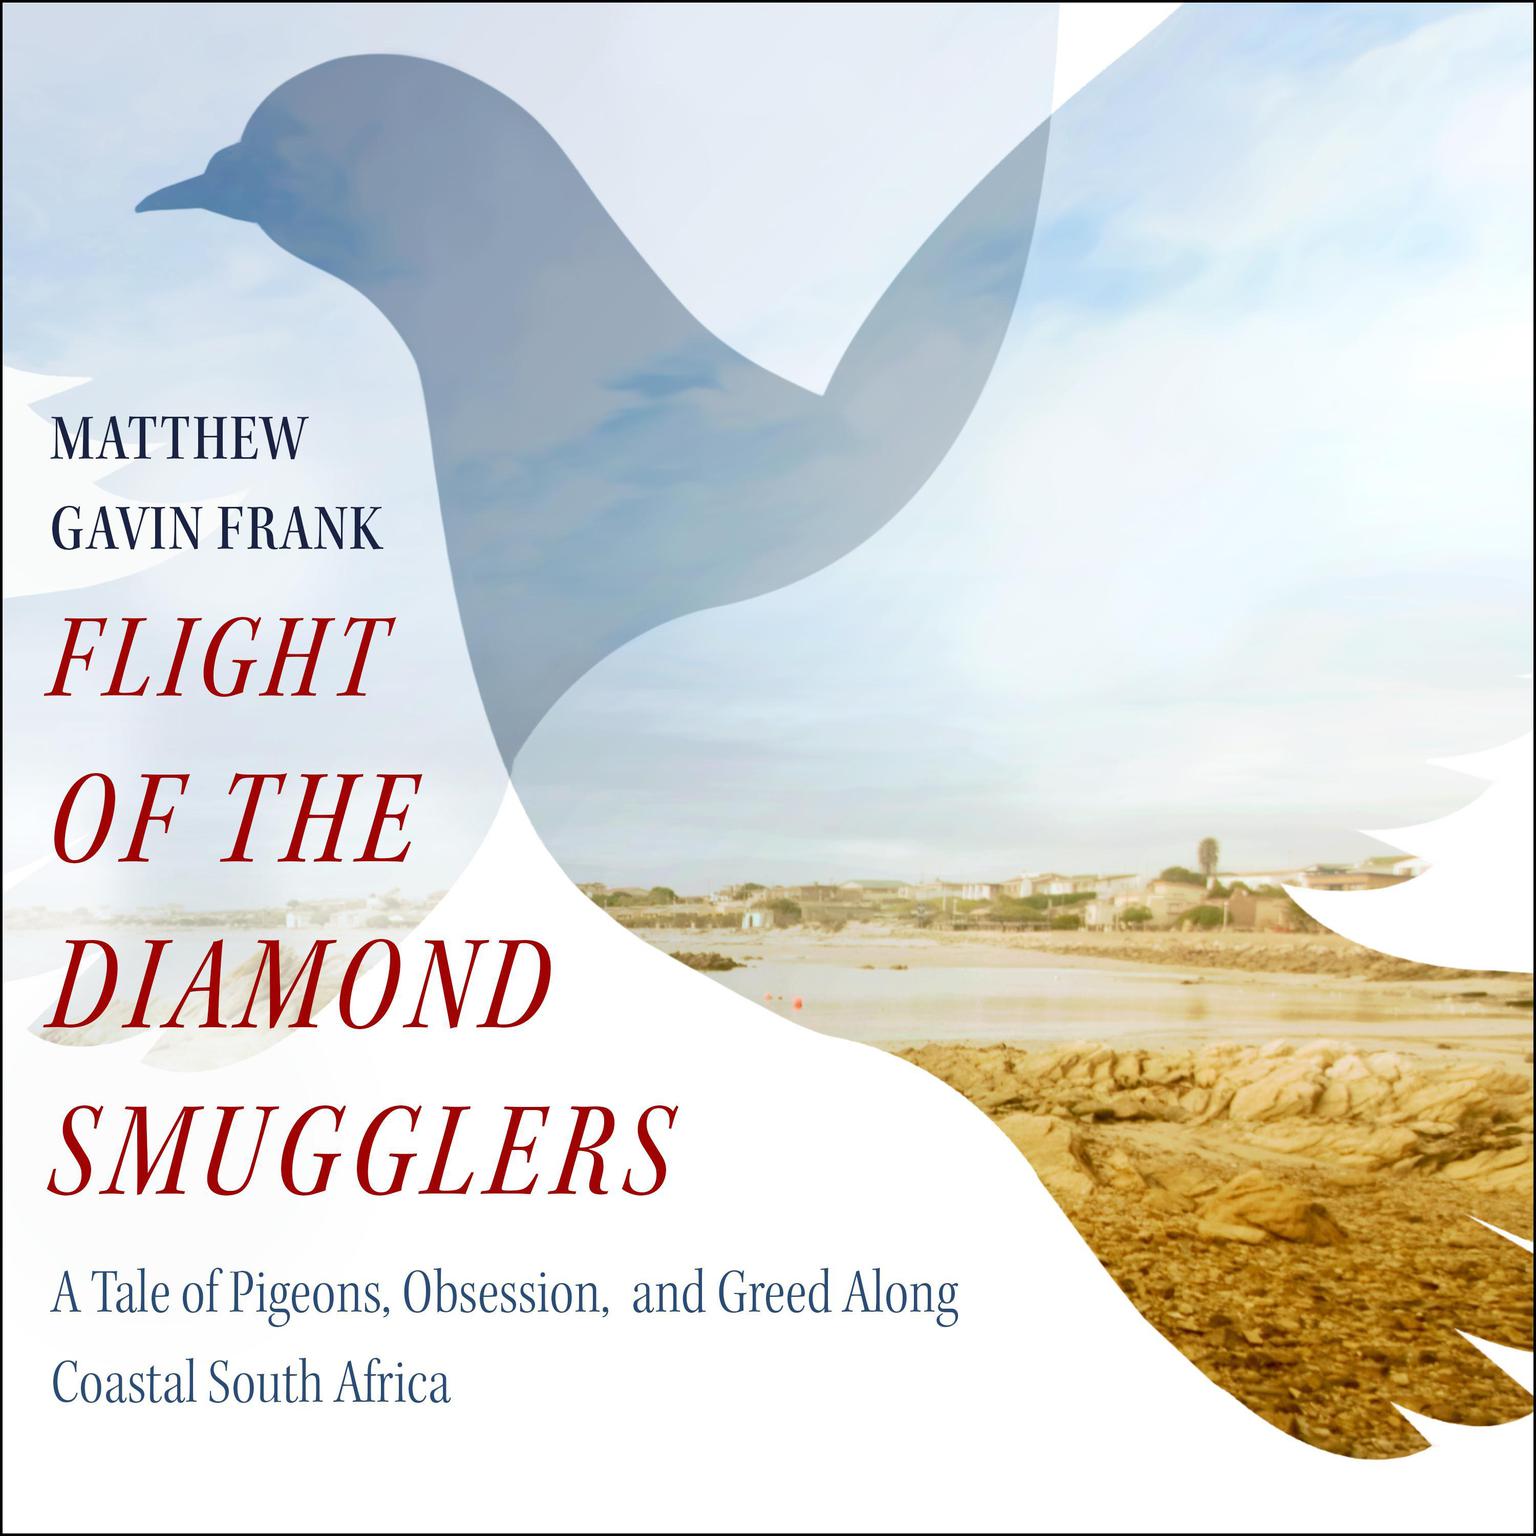 Flight of the Diamond Smugglers: A Tale of Pigeons, Obsession, and Greed Along Coastal South Africa Audiobook, by Matthew Gavin Frank